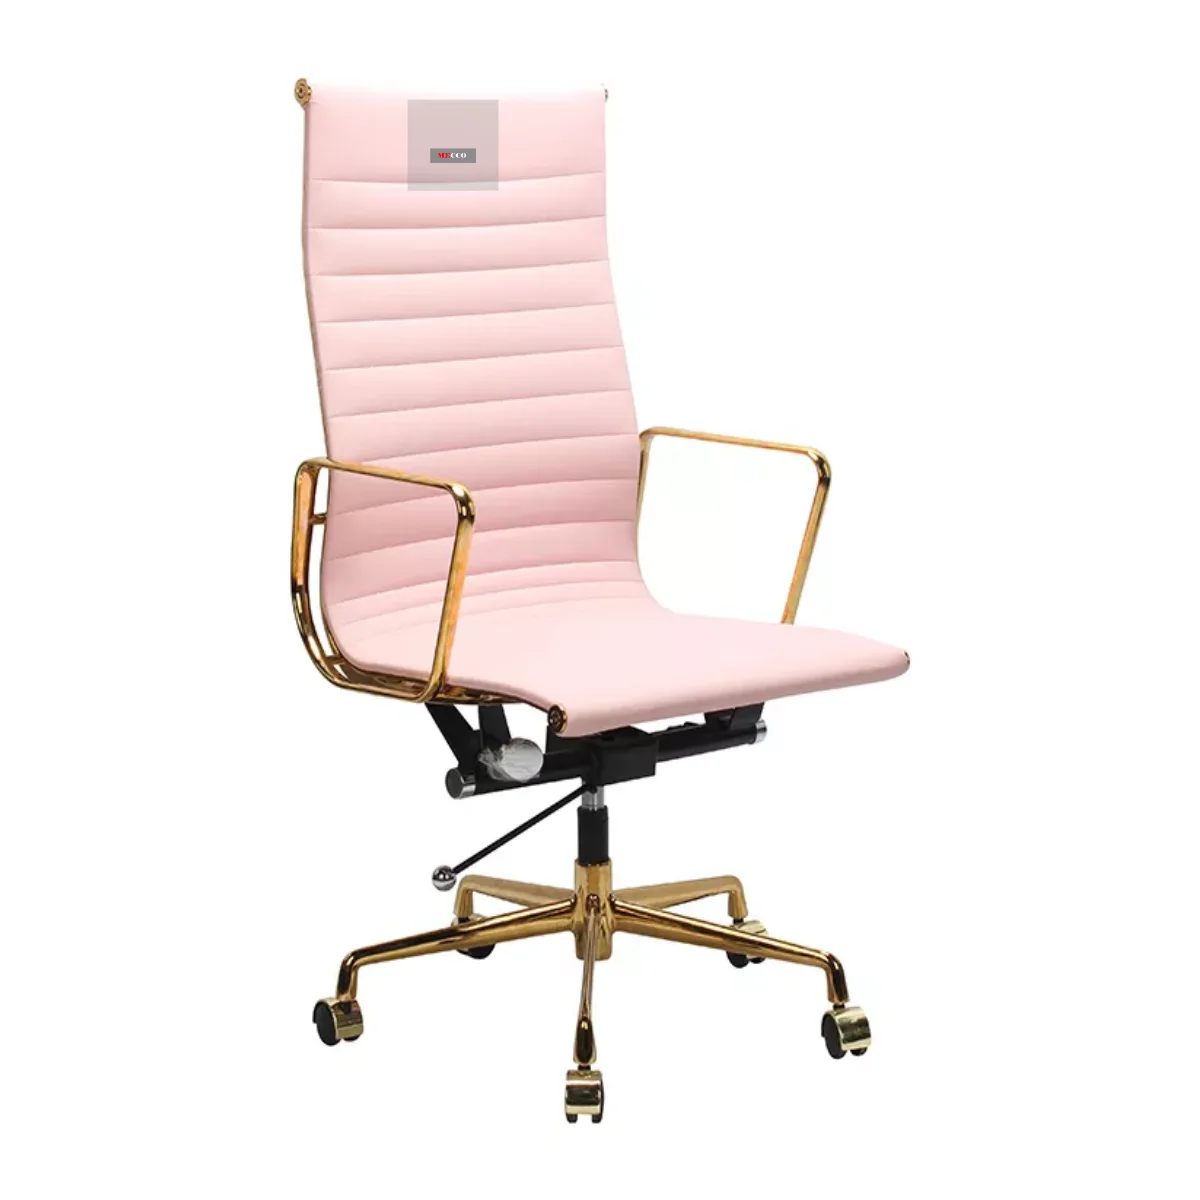 Luxury Rose Gold Office Chair Pink Leather Home Office Chair Swivel Ergonomic Office Chair Sale Buy Office Chair Sale